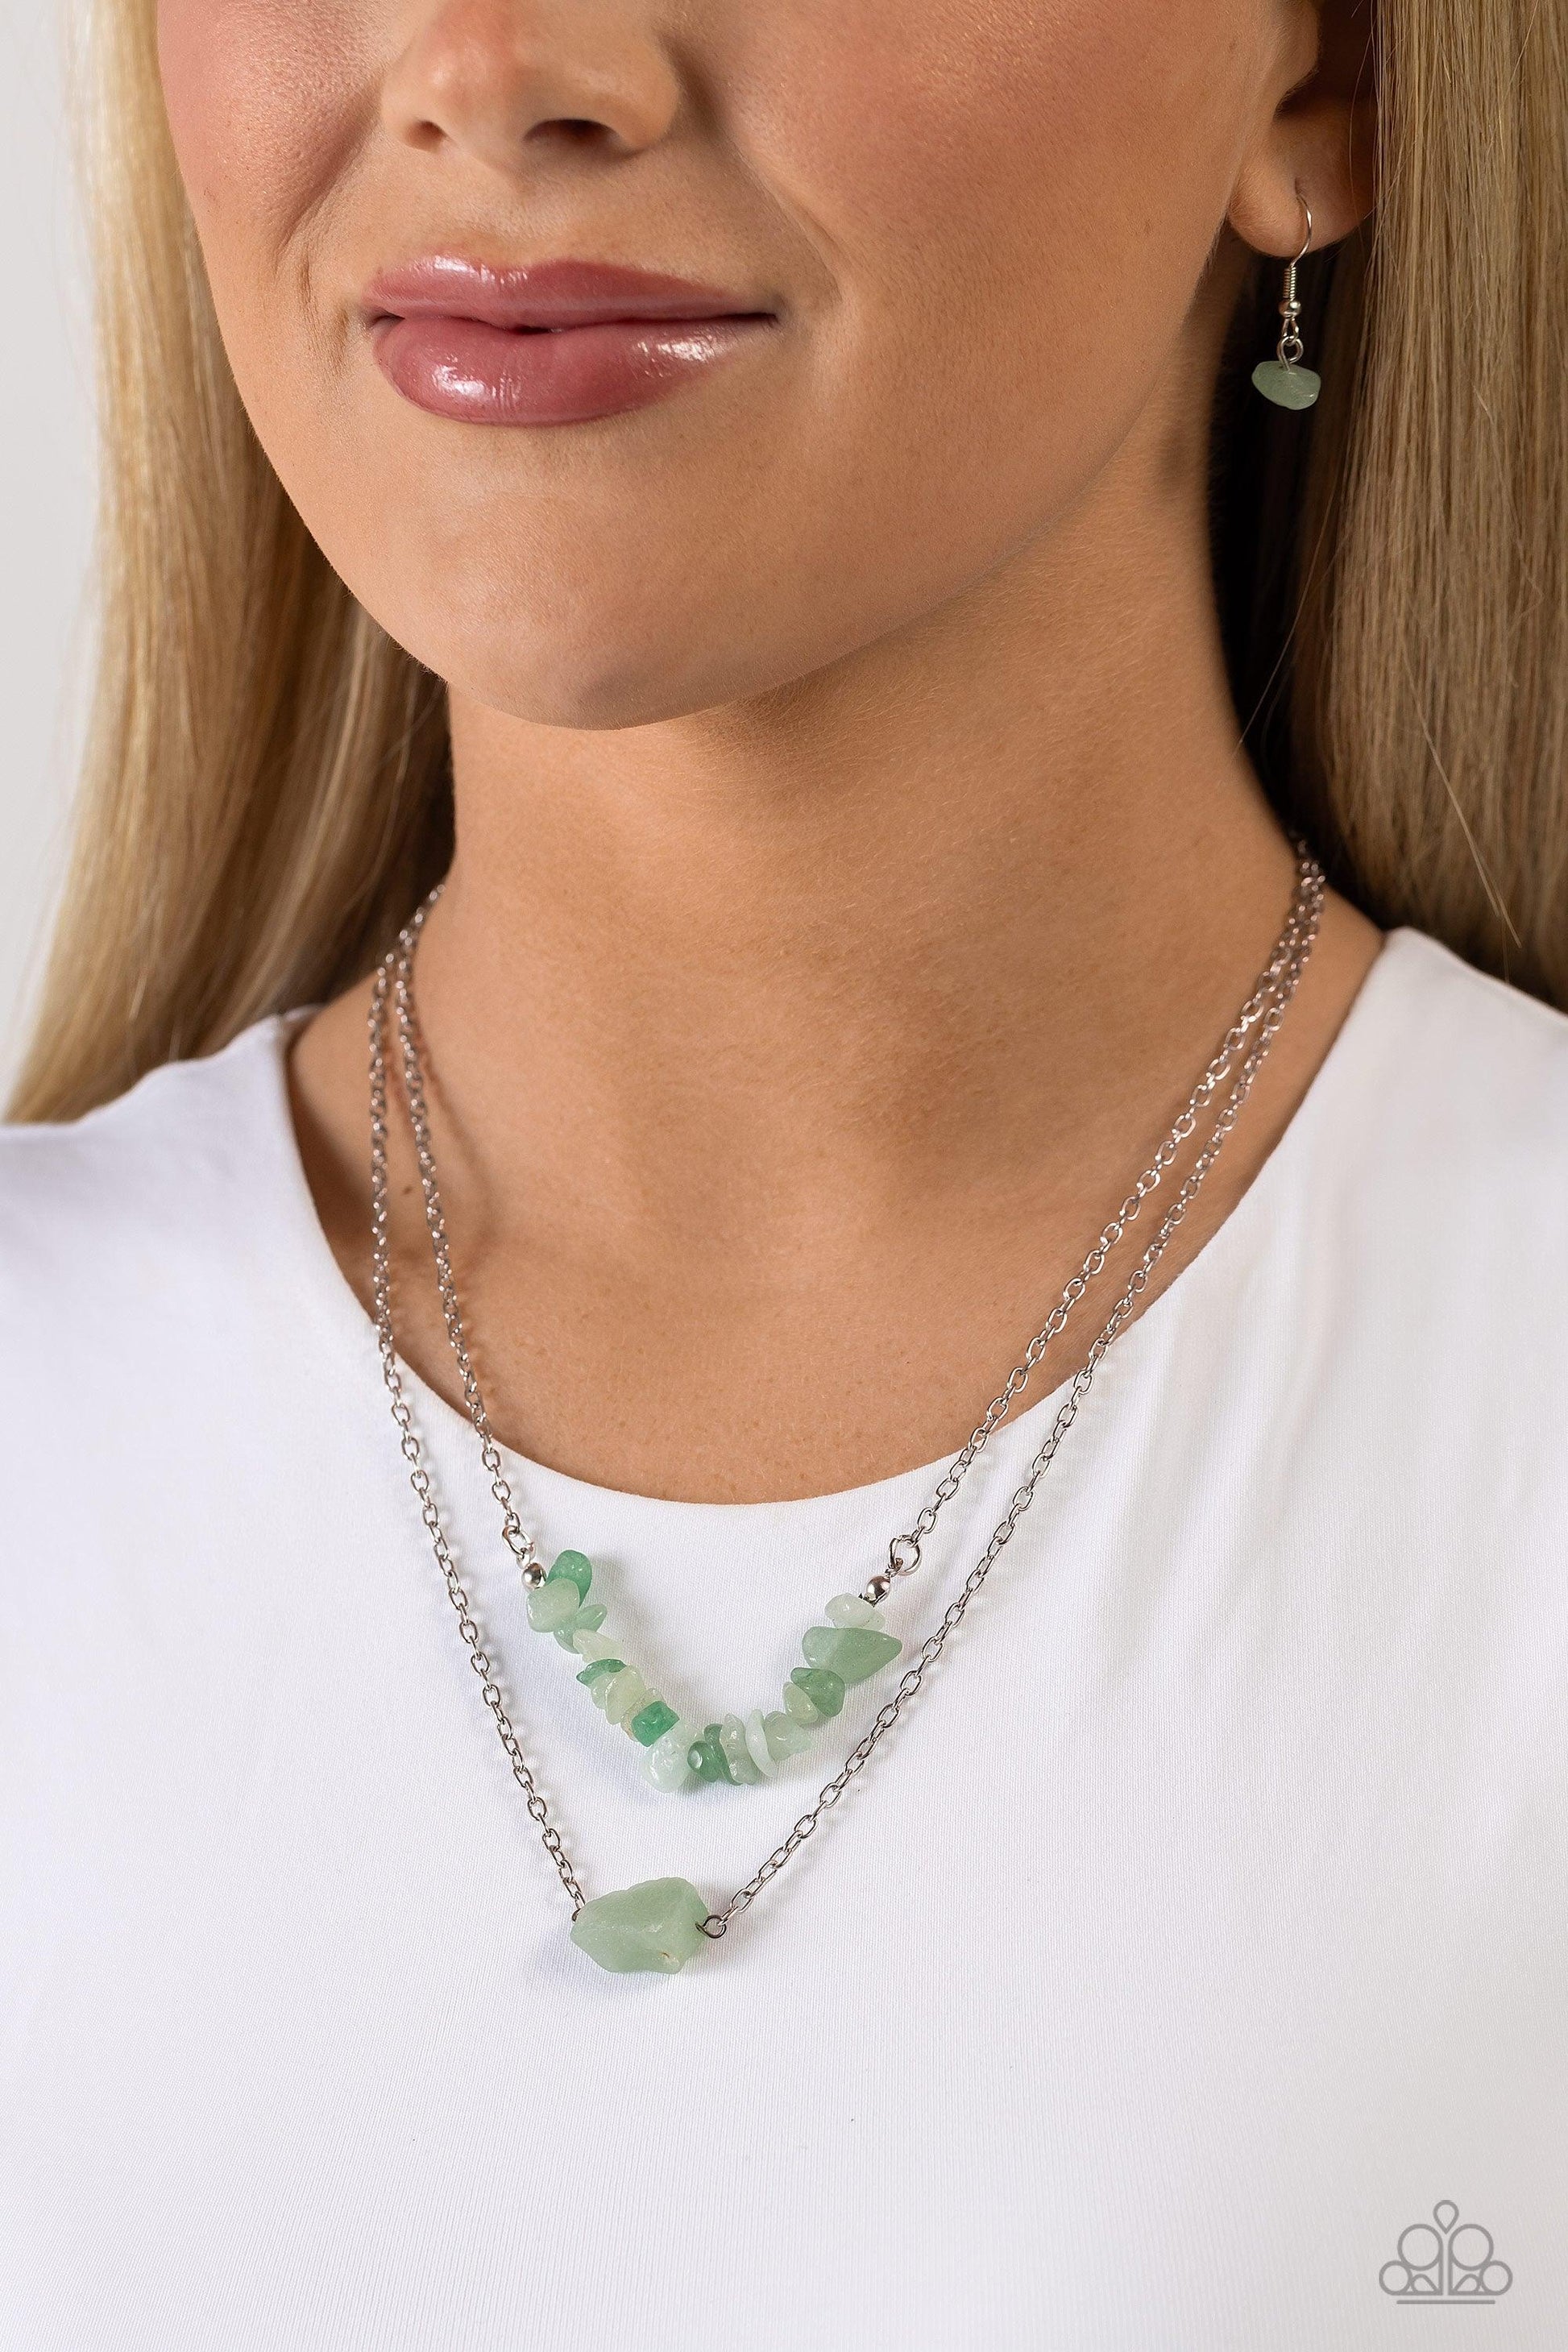 Paparazzi Accessories - Chiseled Caliber - Green Necklace - Bling by JessieK